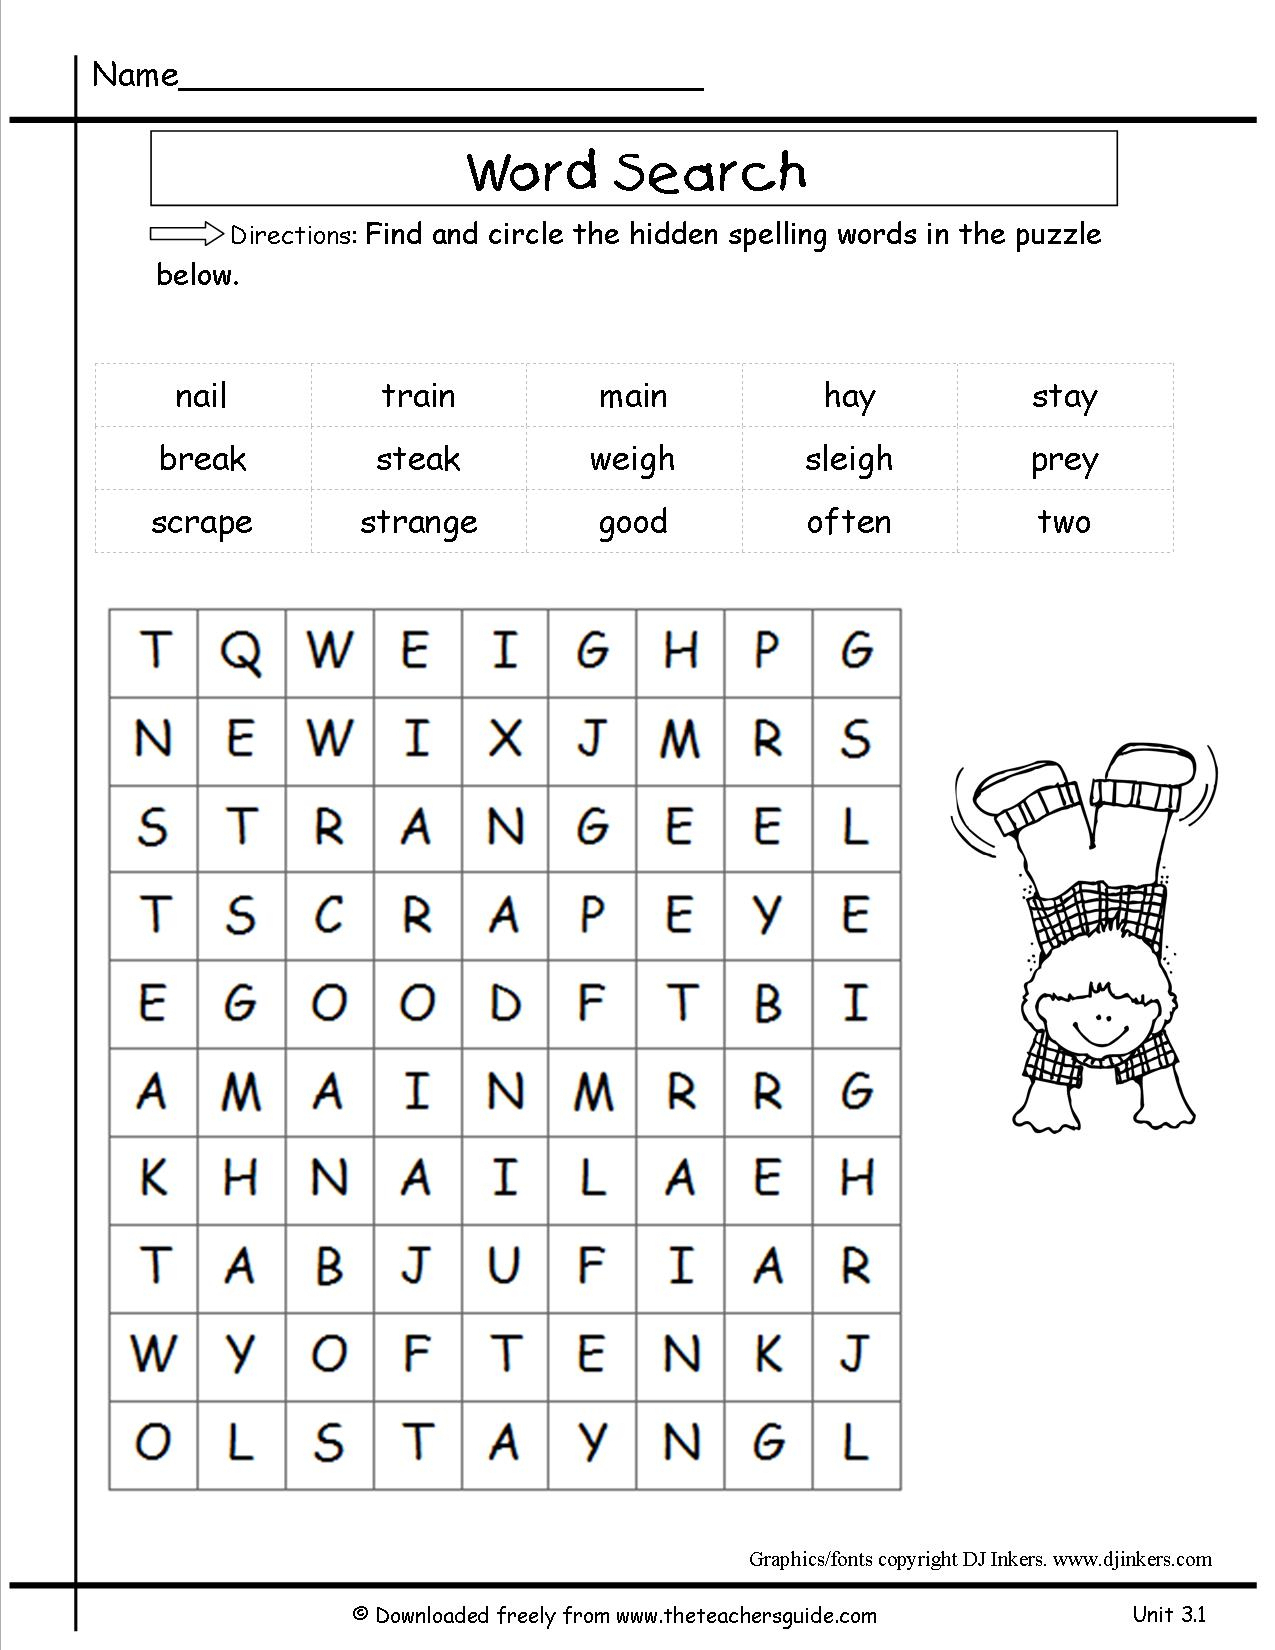 printable-crossword-puzzles-for-2nd-graders-printable-crossword-easy-crossword-puzzles